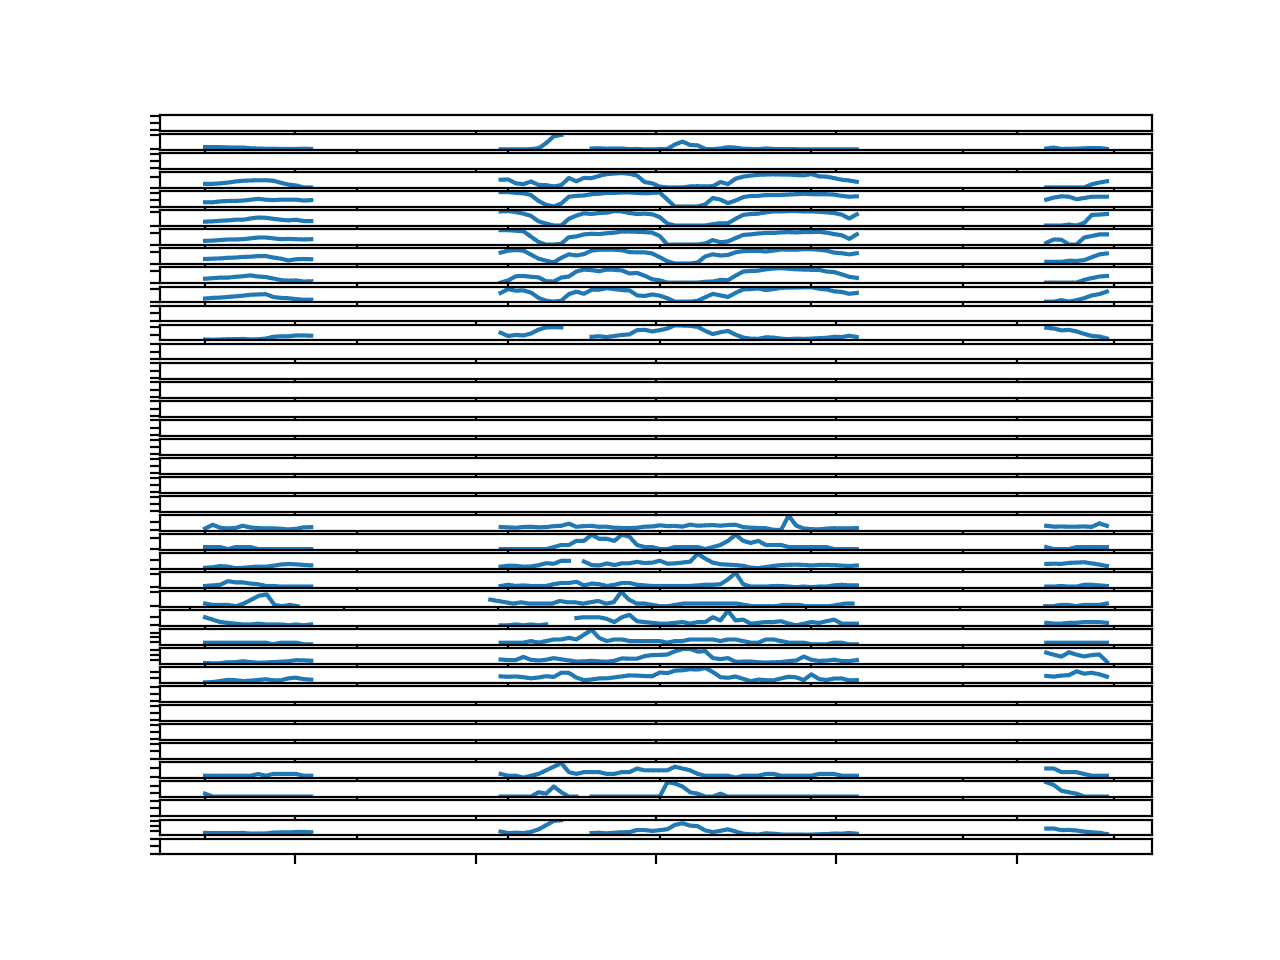 Line Plots for All Targets in Chunk 4 With Missing Values Marked